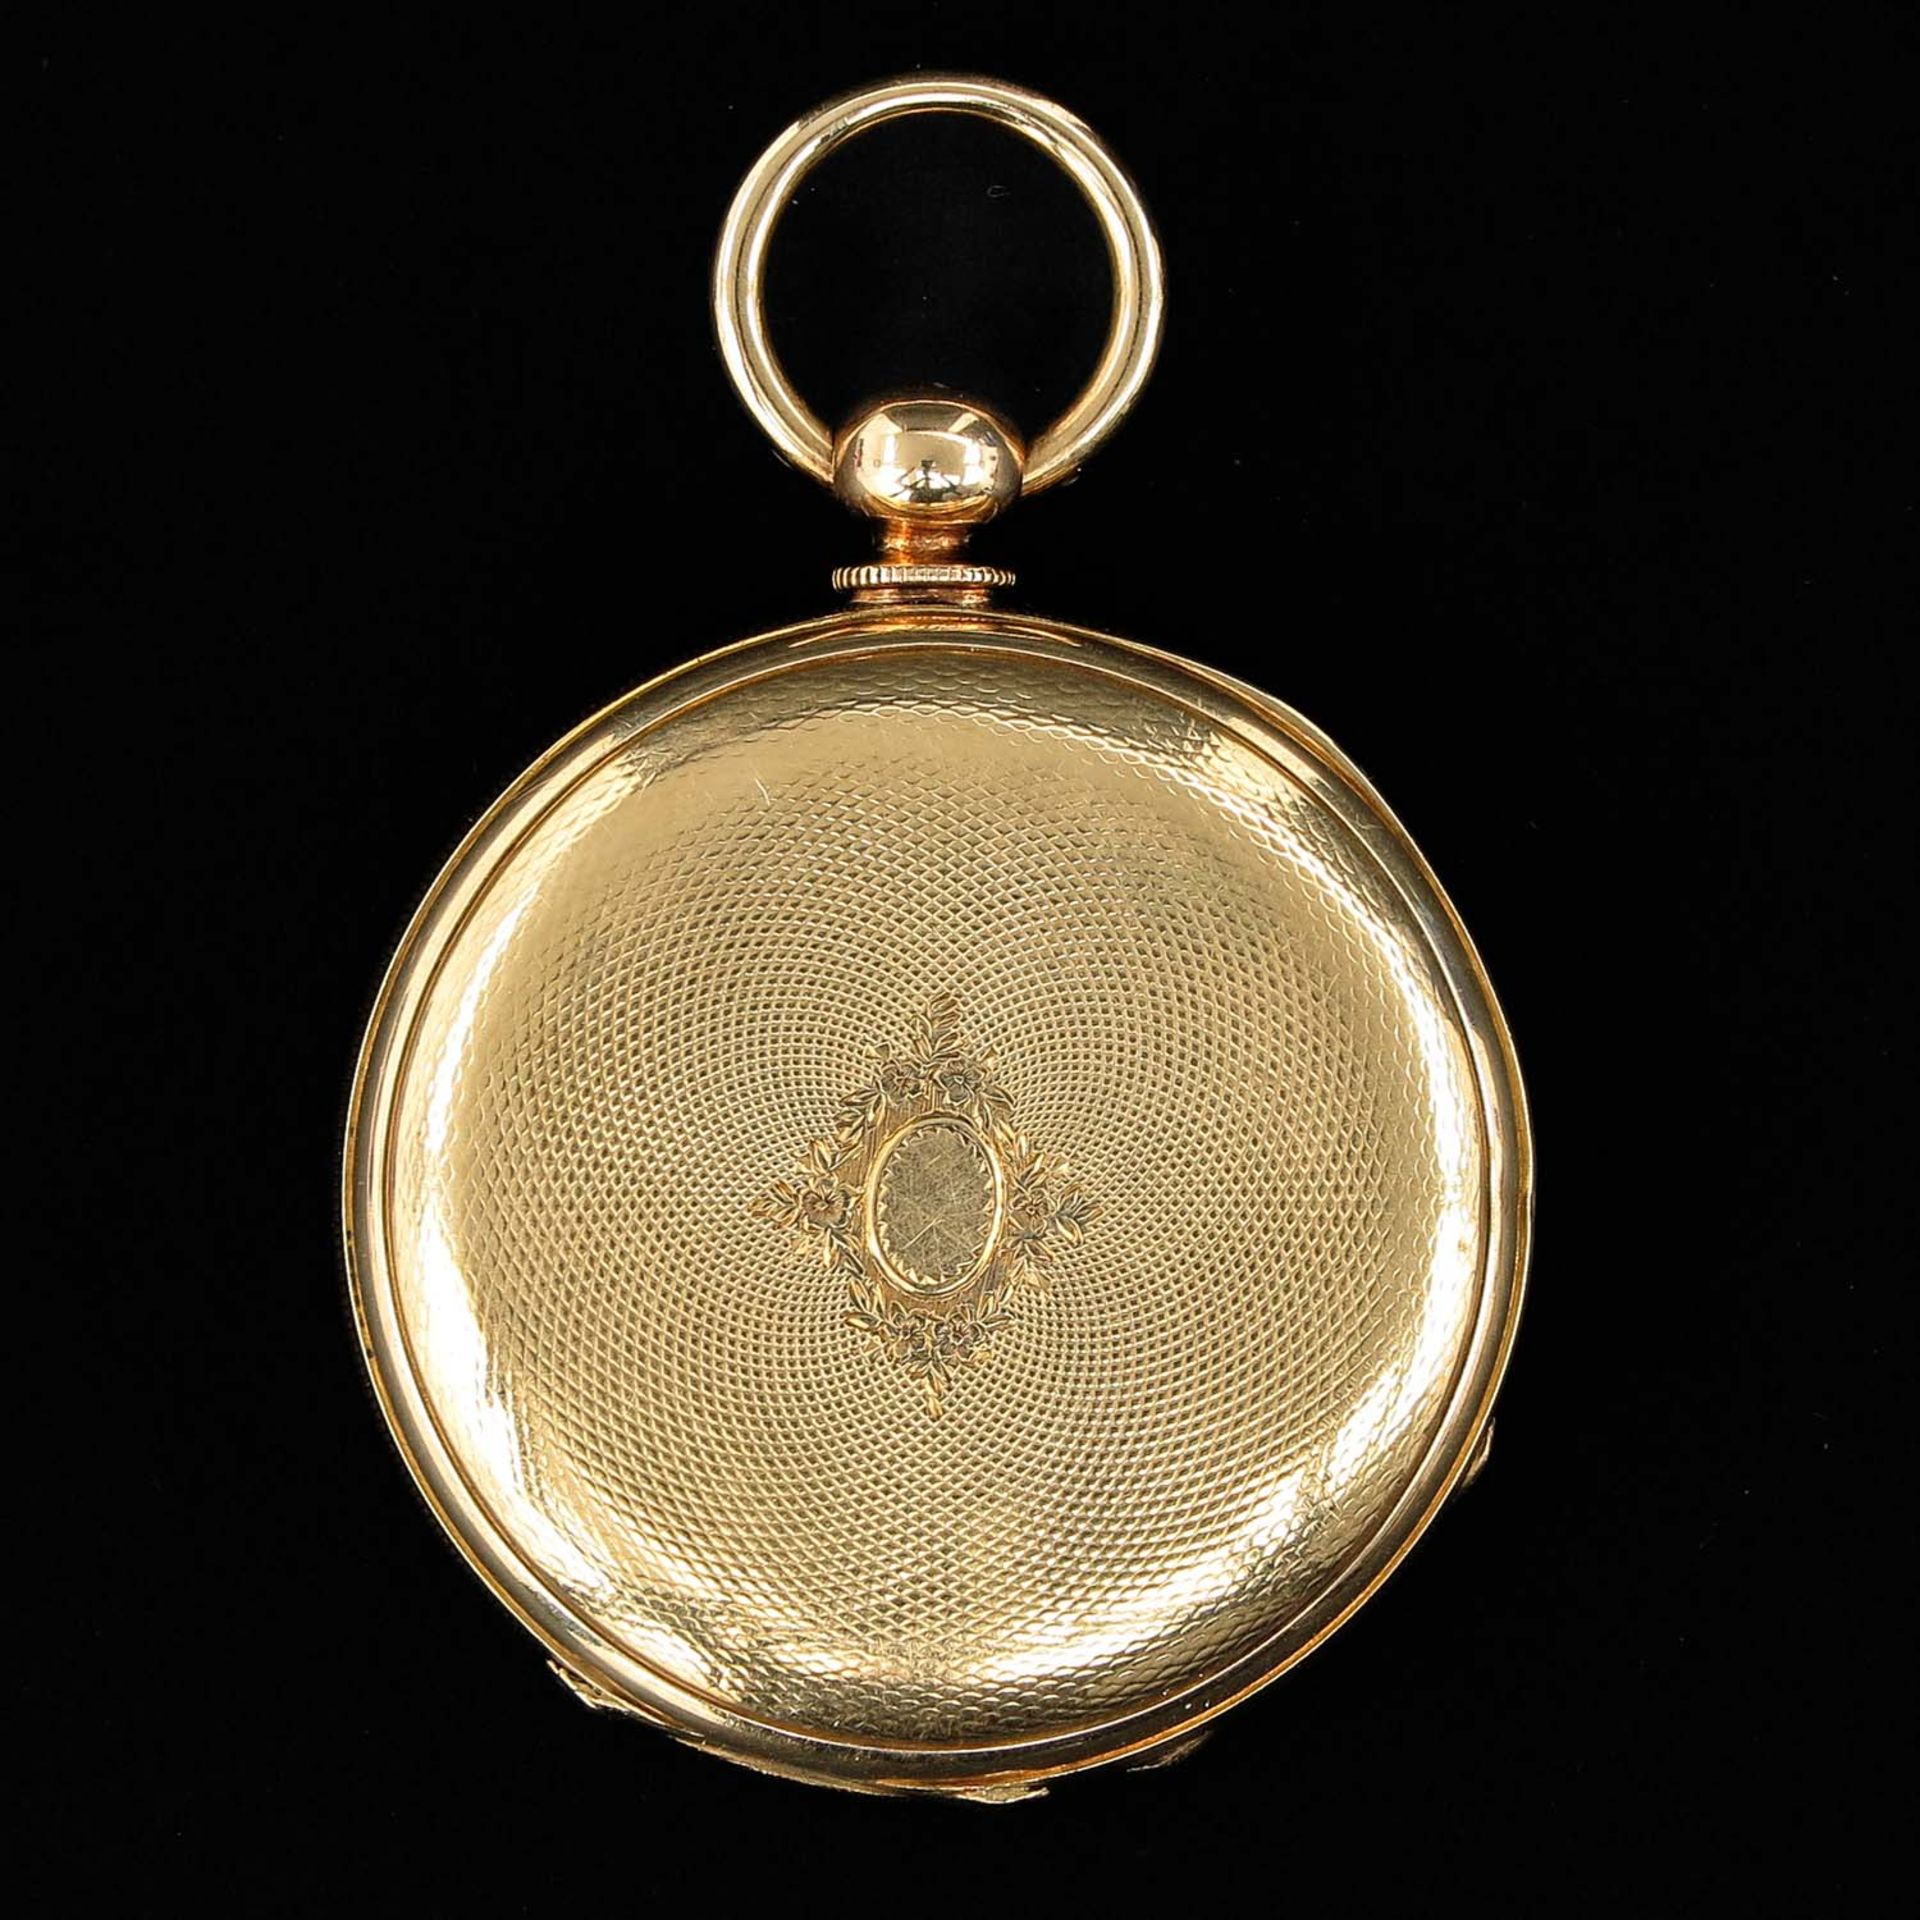 An 18KG Pocket Watch Signed Lutz Brothers - Image 2 of 7